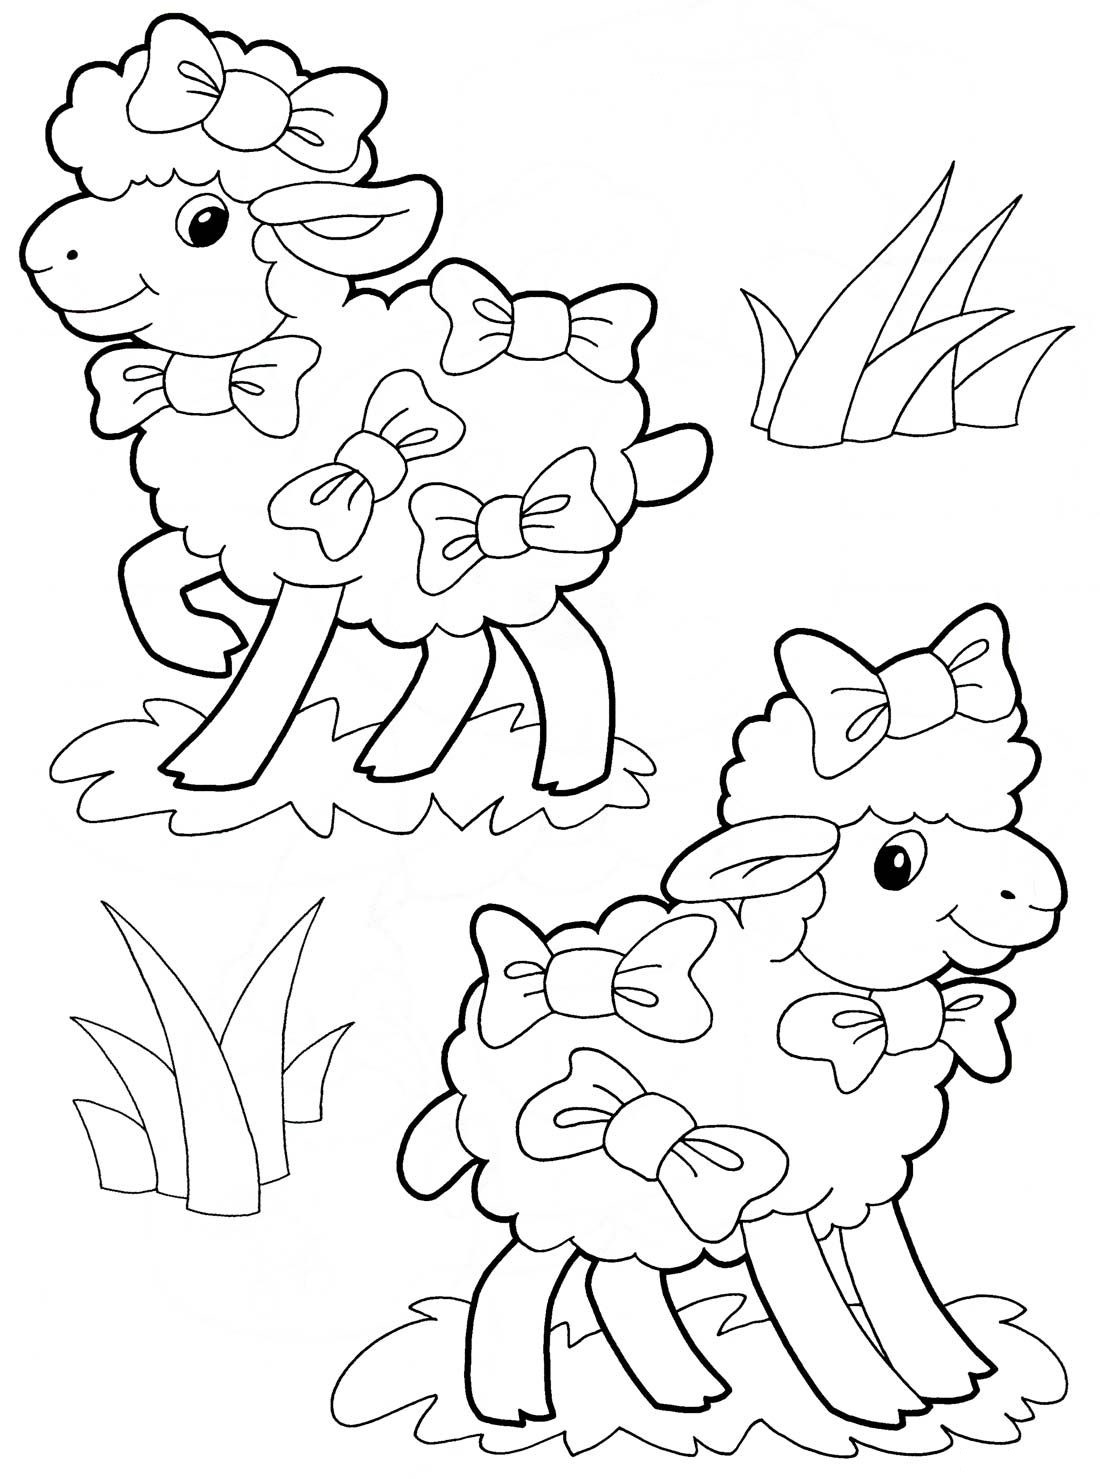 Download sheep coloring pages to print, year of sheep 2015